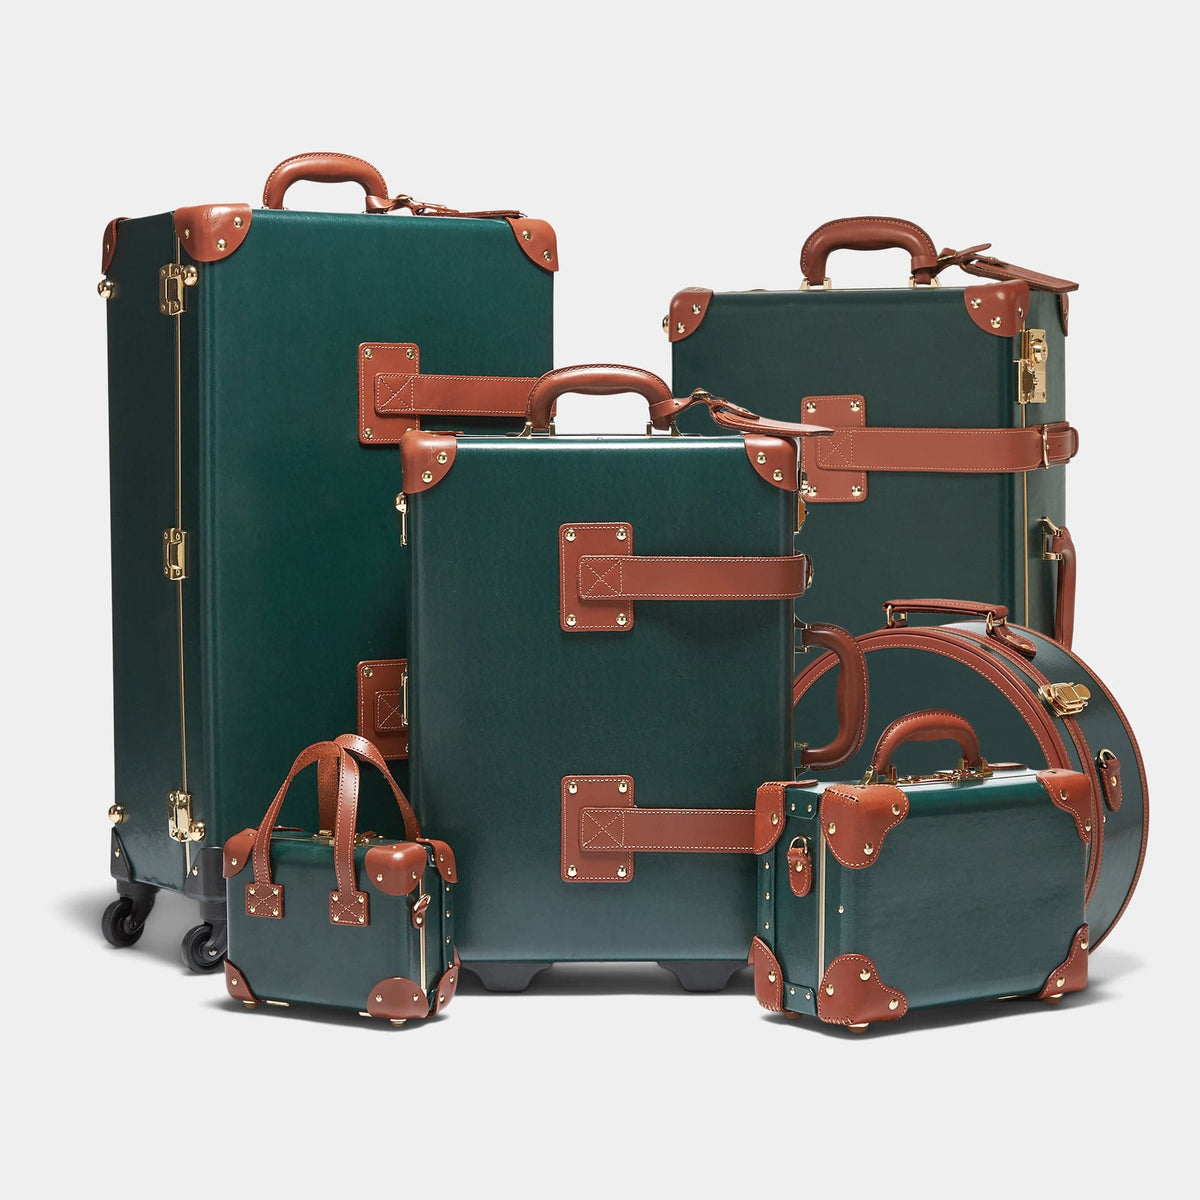 The Green Diplomat Carryon  Steamer Trunk Suitcase Cabin Luggage –  Steamline Luggage